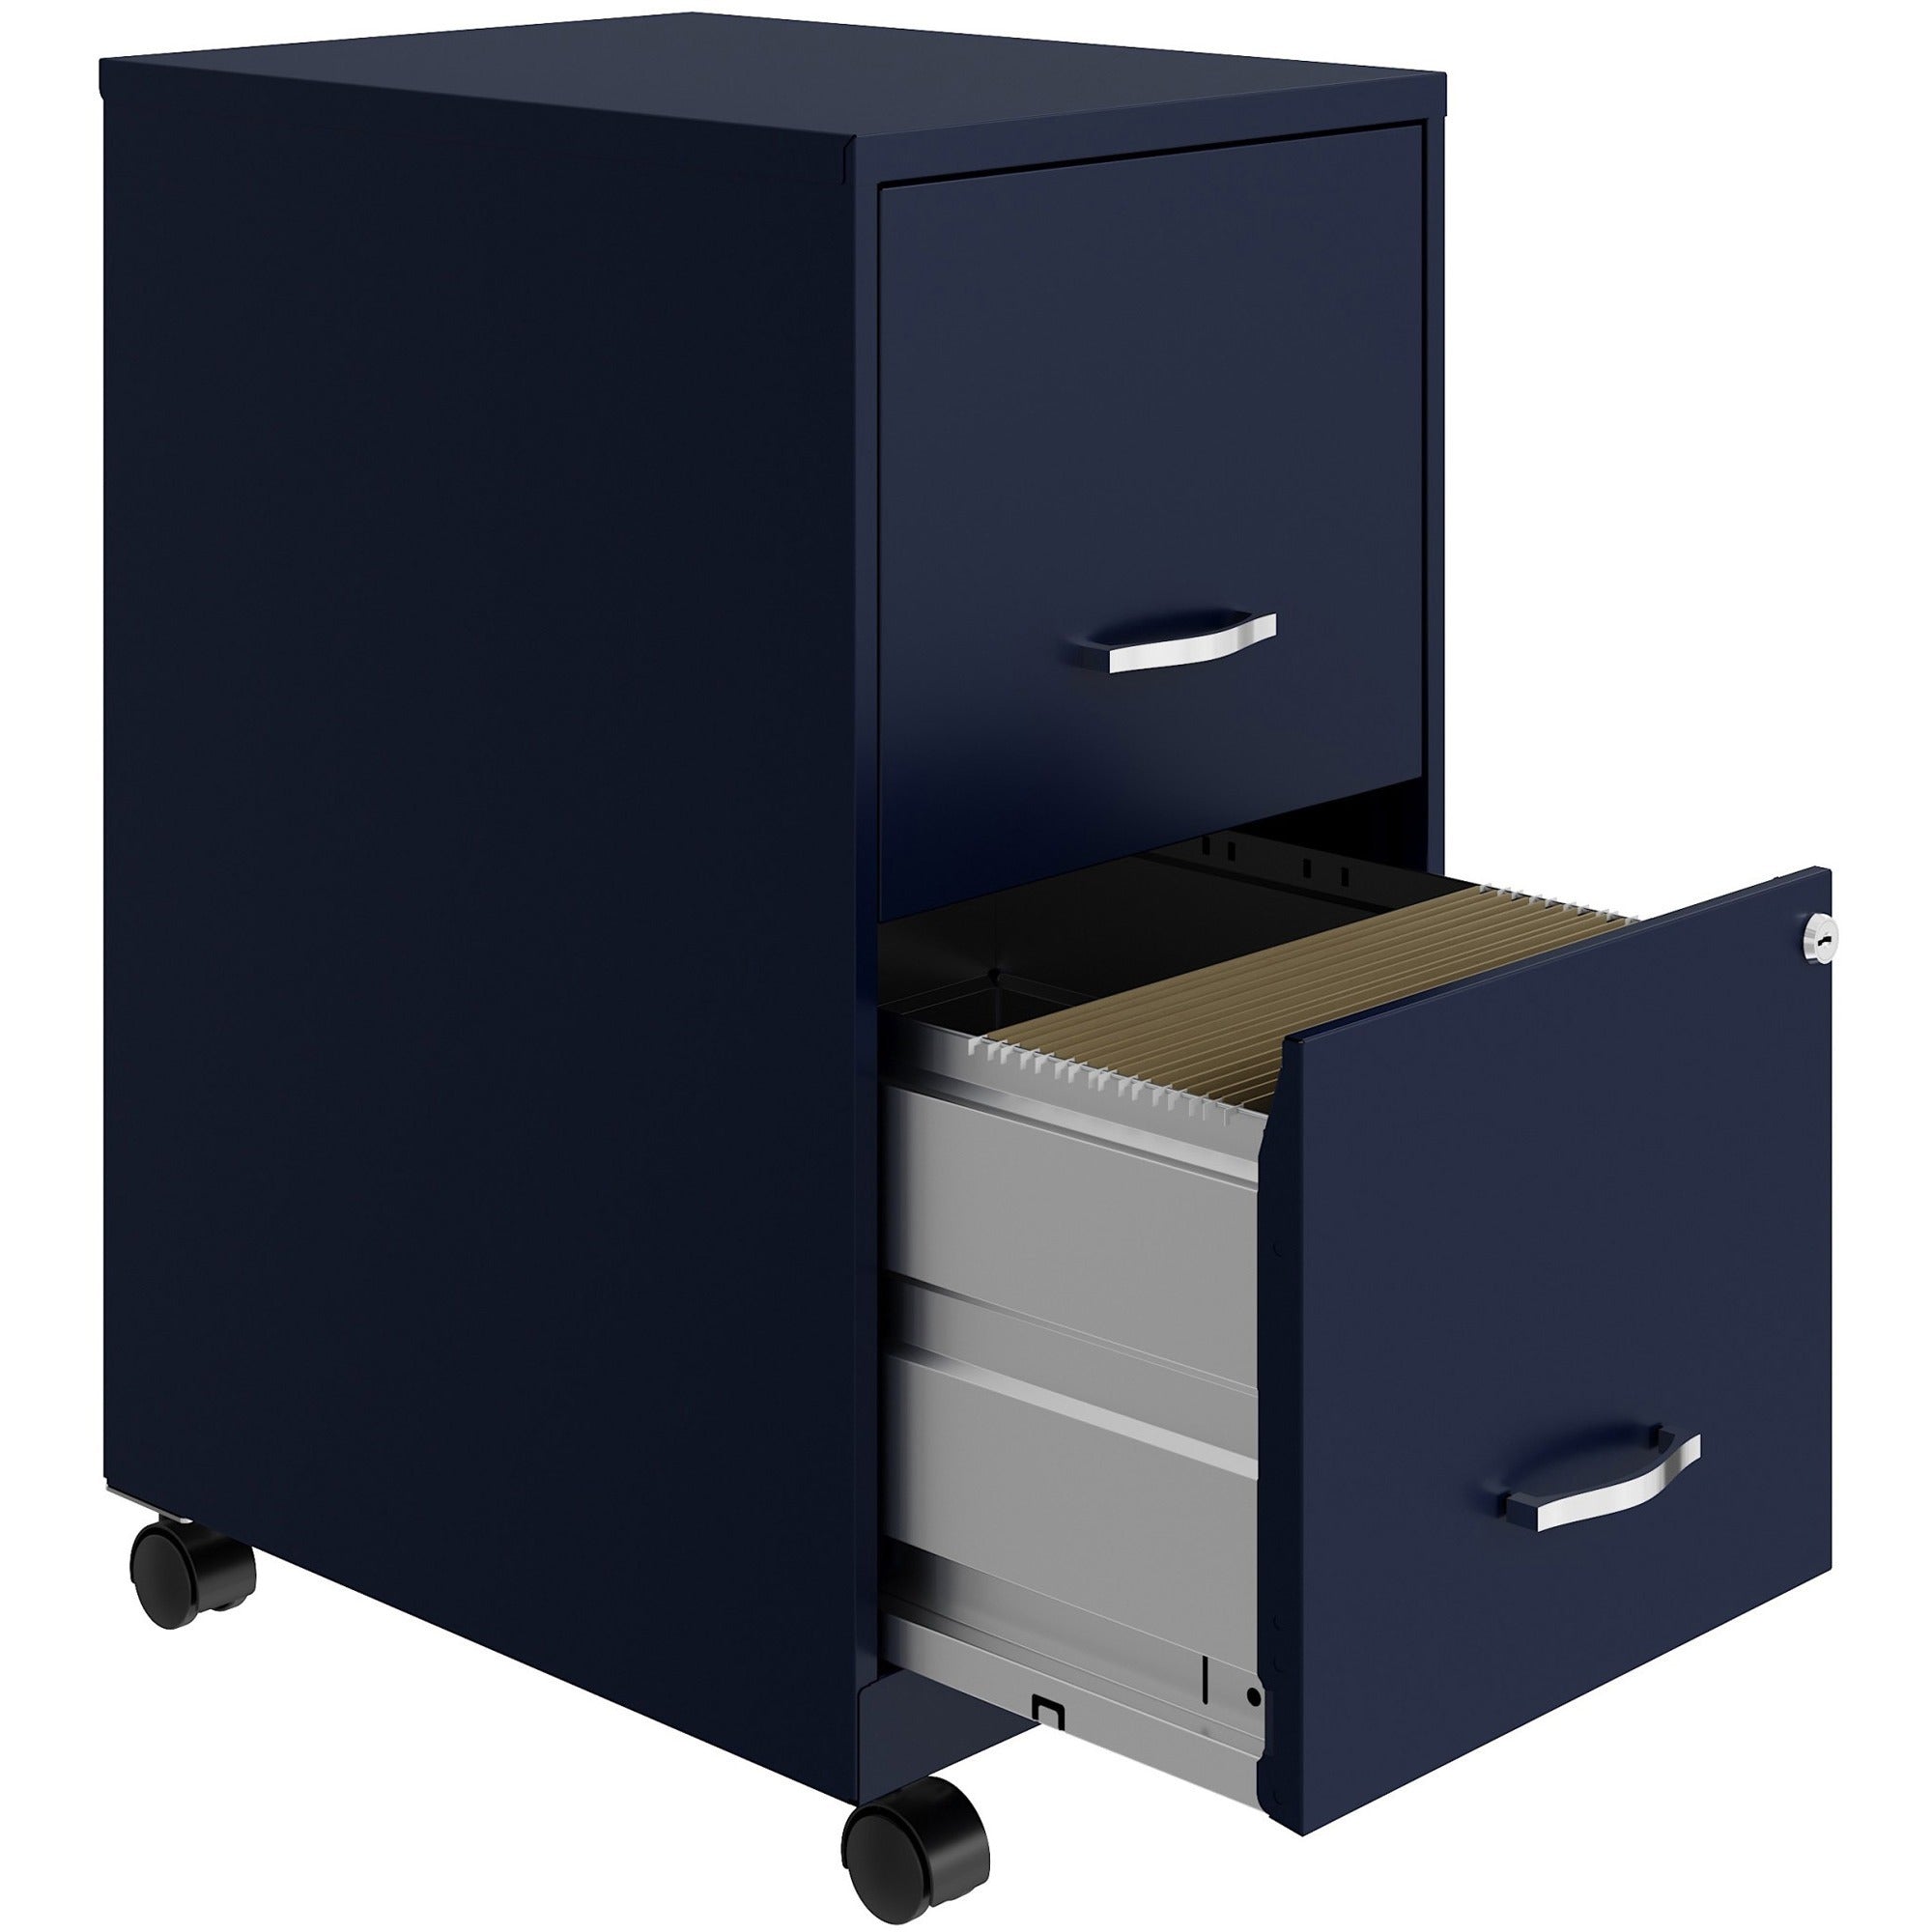 nusparc-mobile-file-cabinet-142-x-18-x-265-for-file-letter-mobility-locking-drawer-glide-suspension-3-4-drawer-extension-cam-lock-nonporous-surface-blue-painted-steel-steel-recycled-assembly-required_nprvf218amny - 4